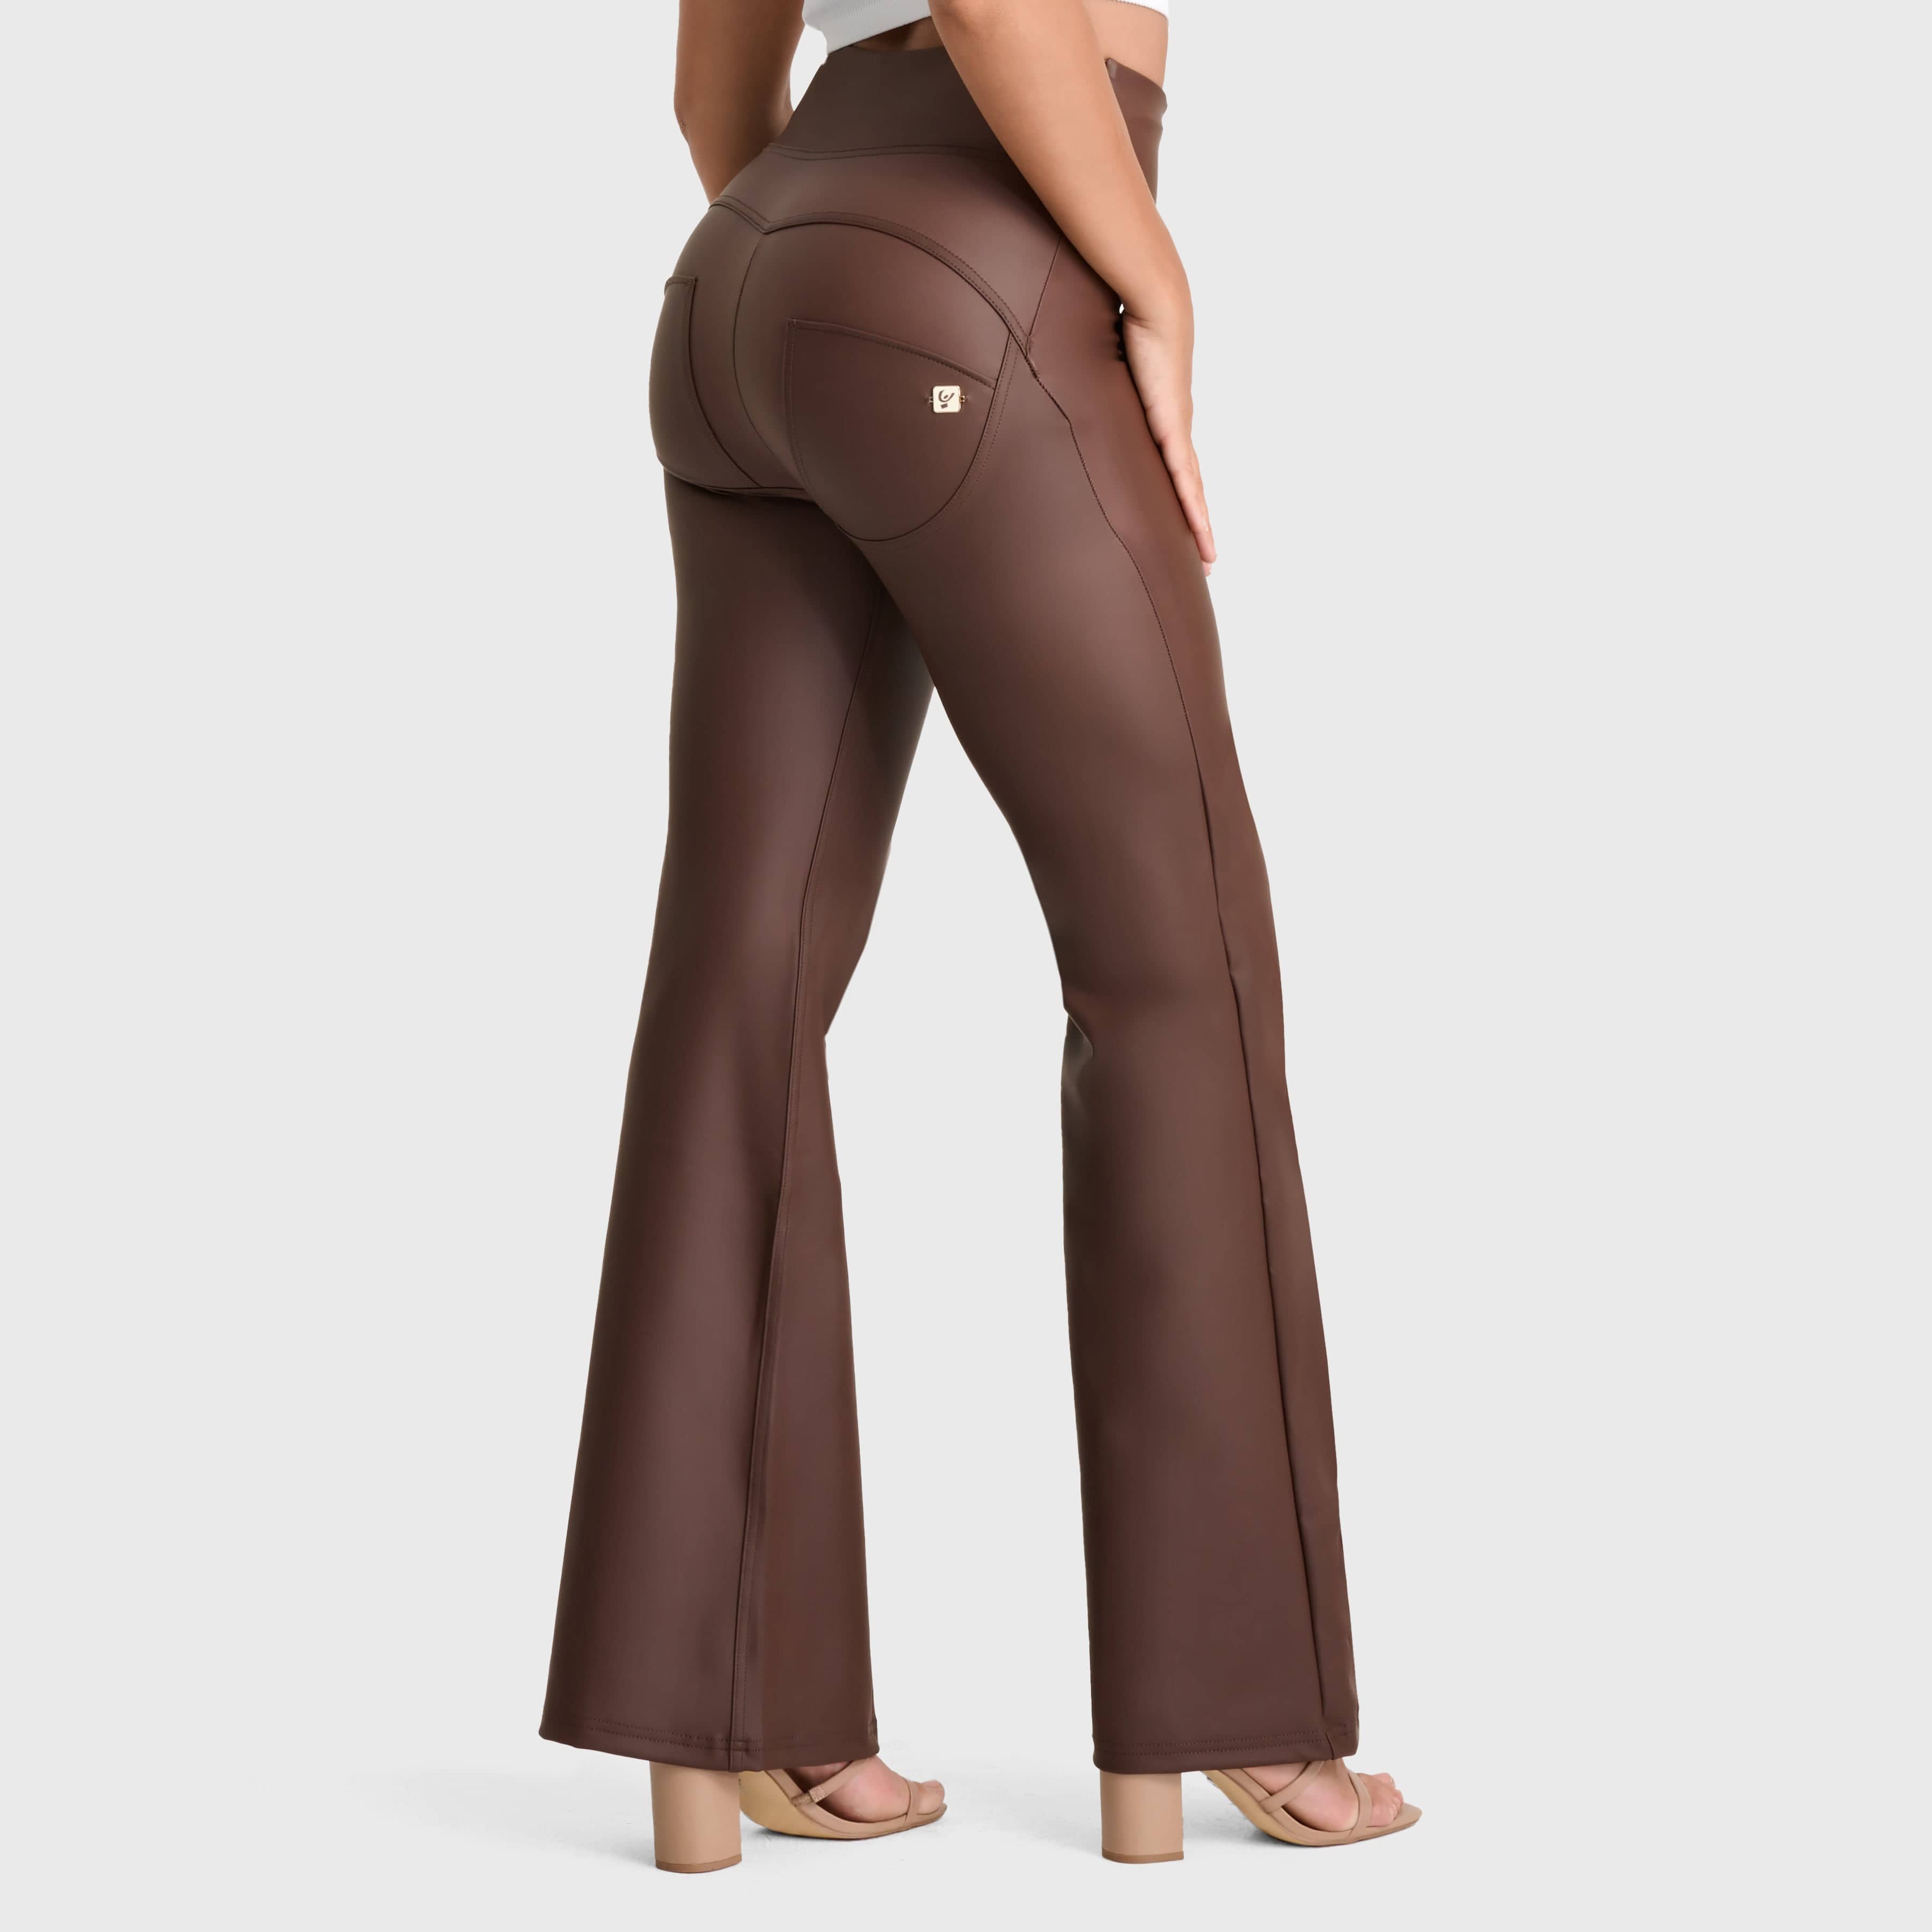 WR.UP® Faux Leather - Super High Waisted - Super Flare - Chocolate 1